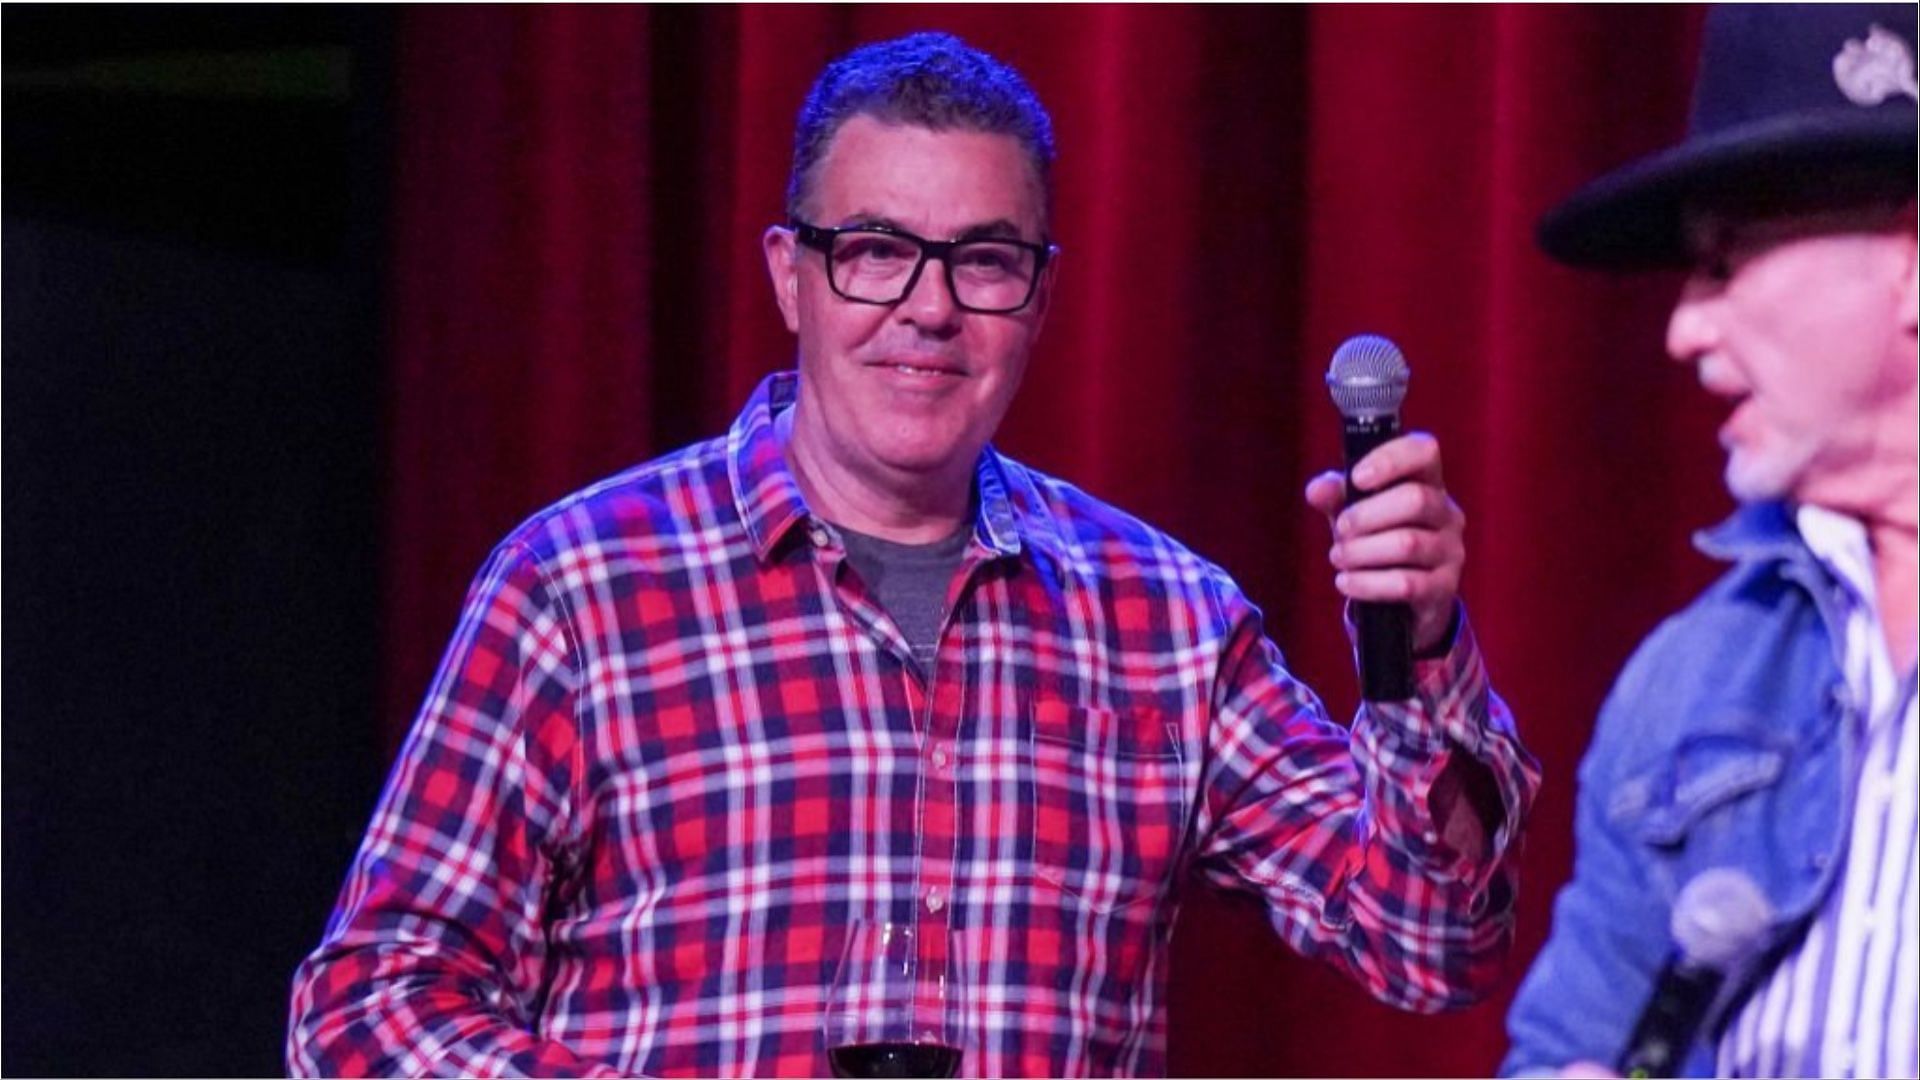 Adam Carolla has earned a lot from his career in radio, film and television (Image via Mickey Bernal/Getty Images)